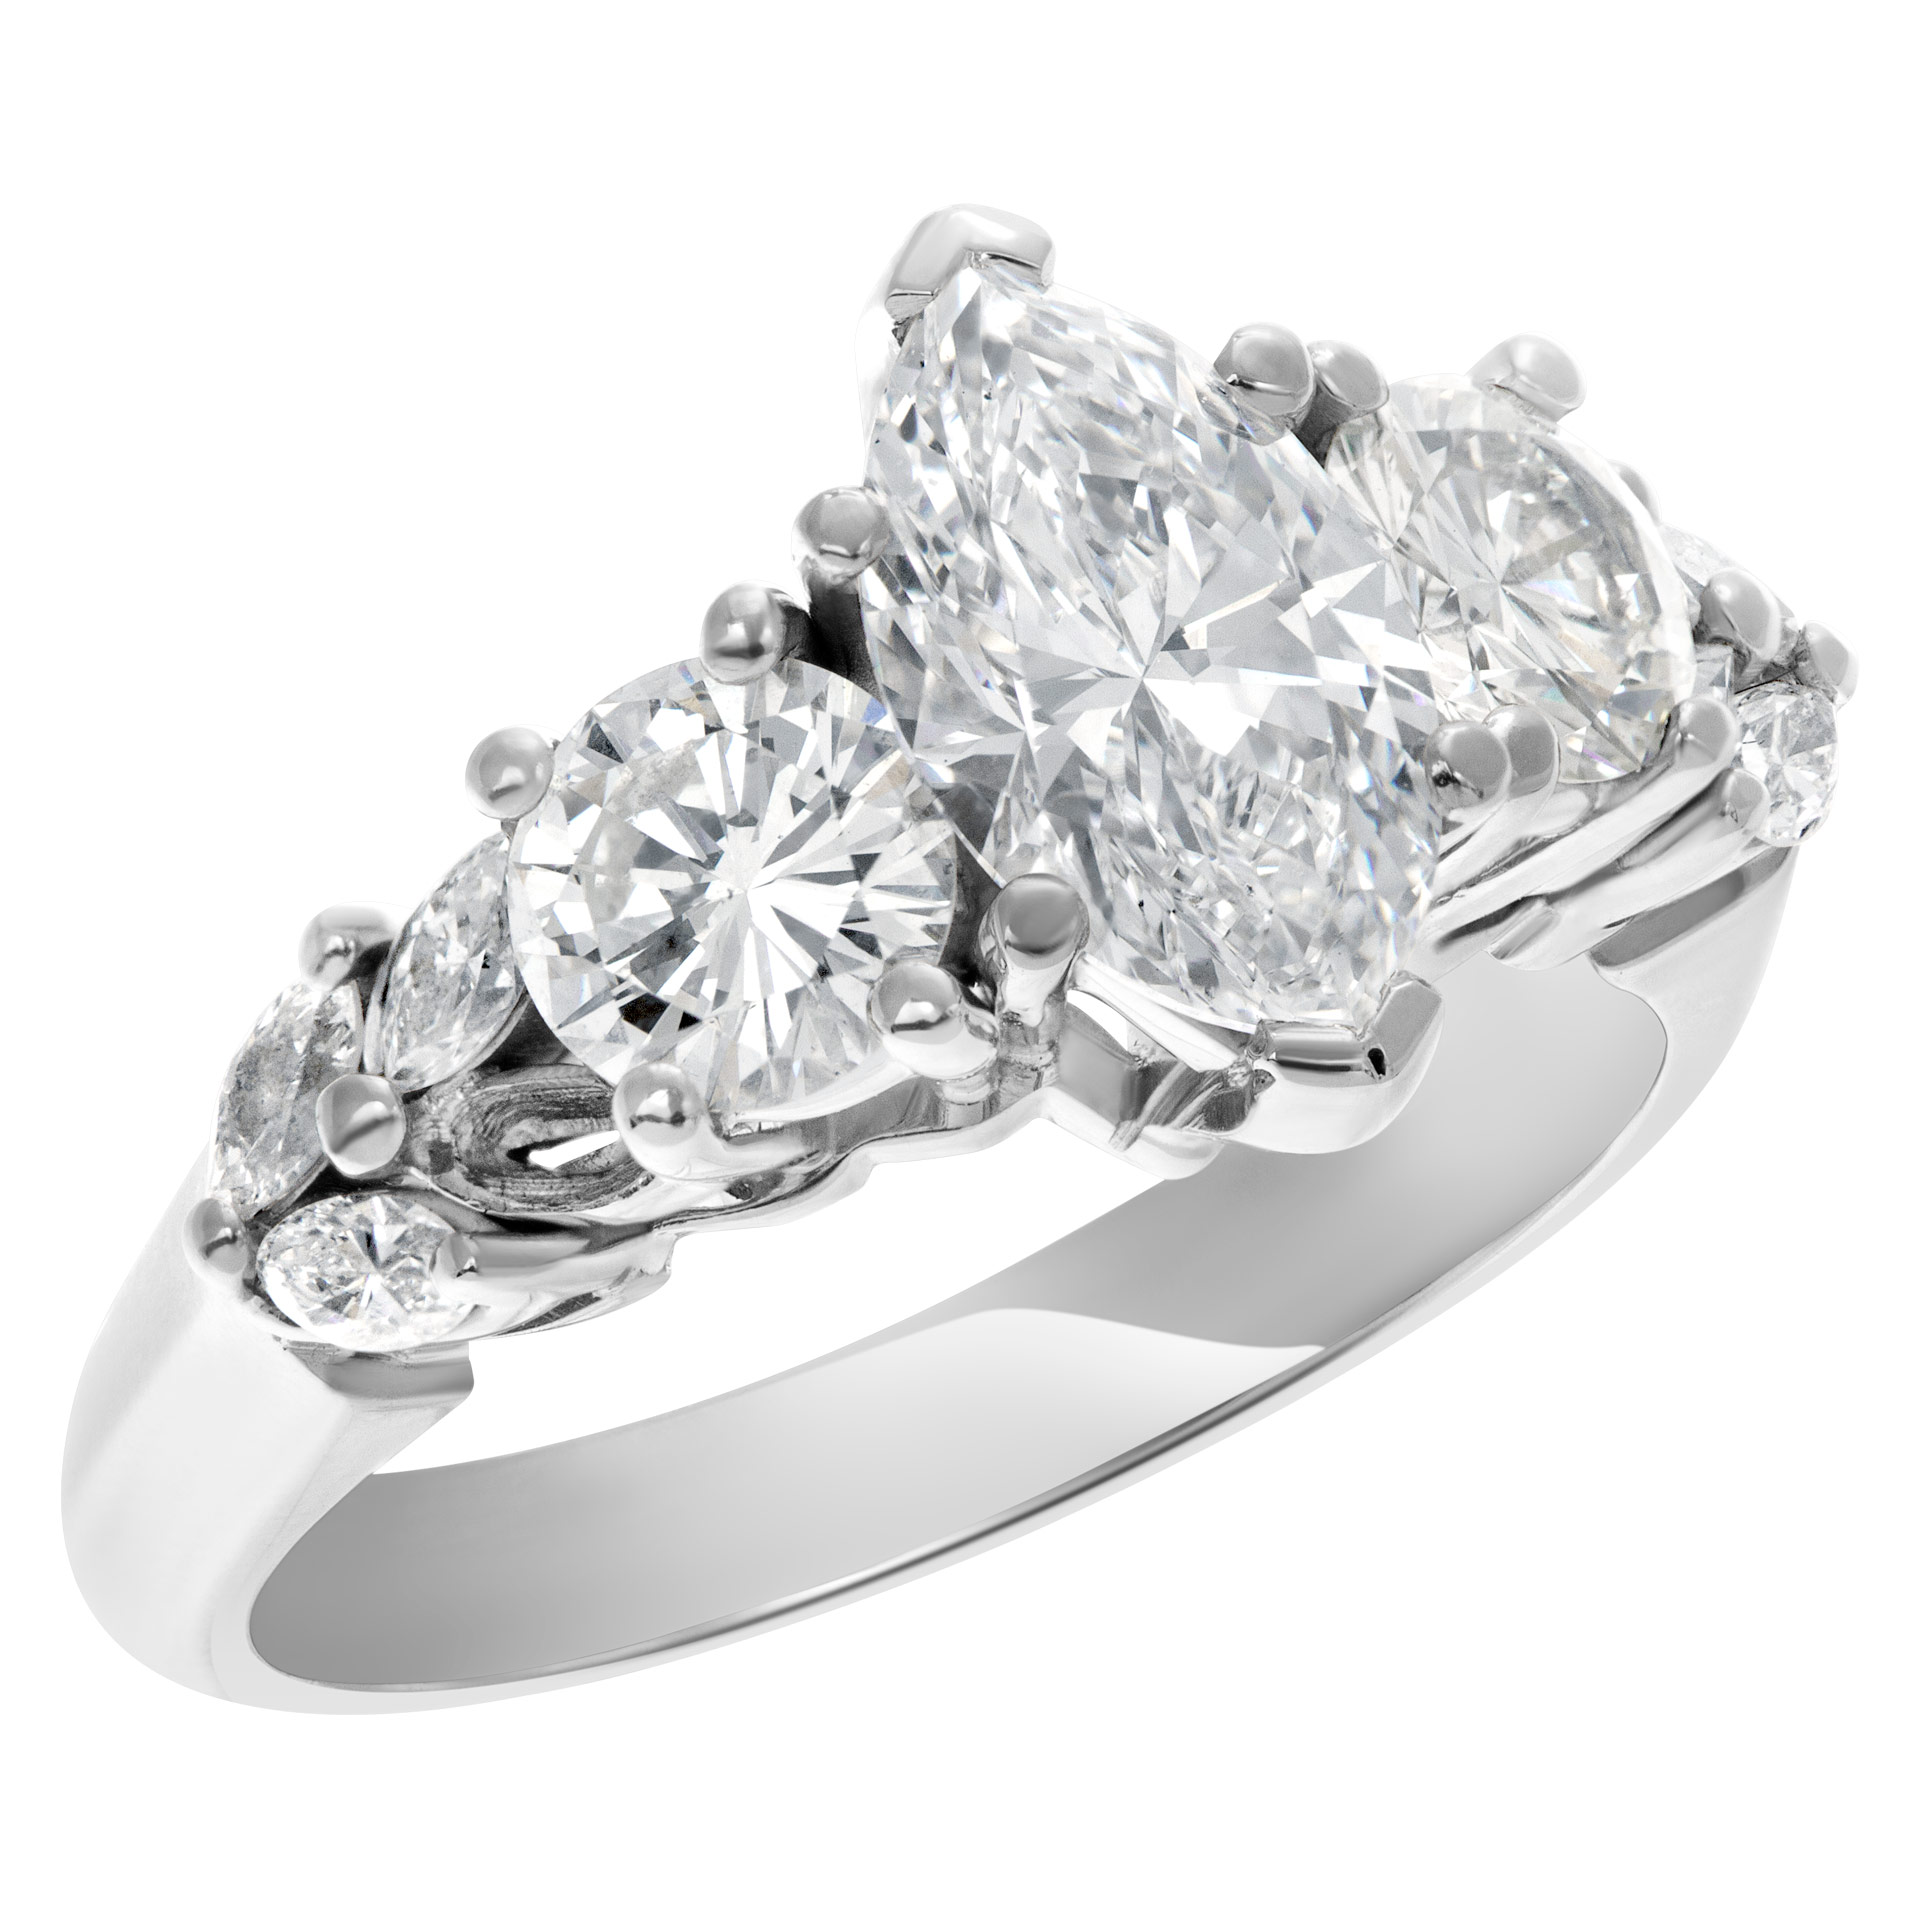 What are Certified Diamonds? Want to Know?